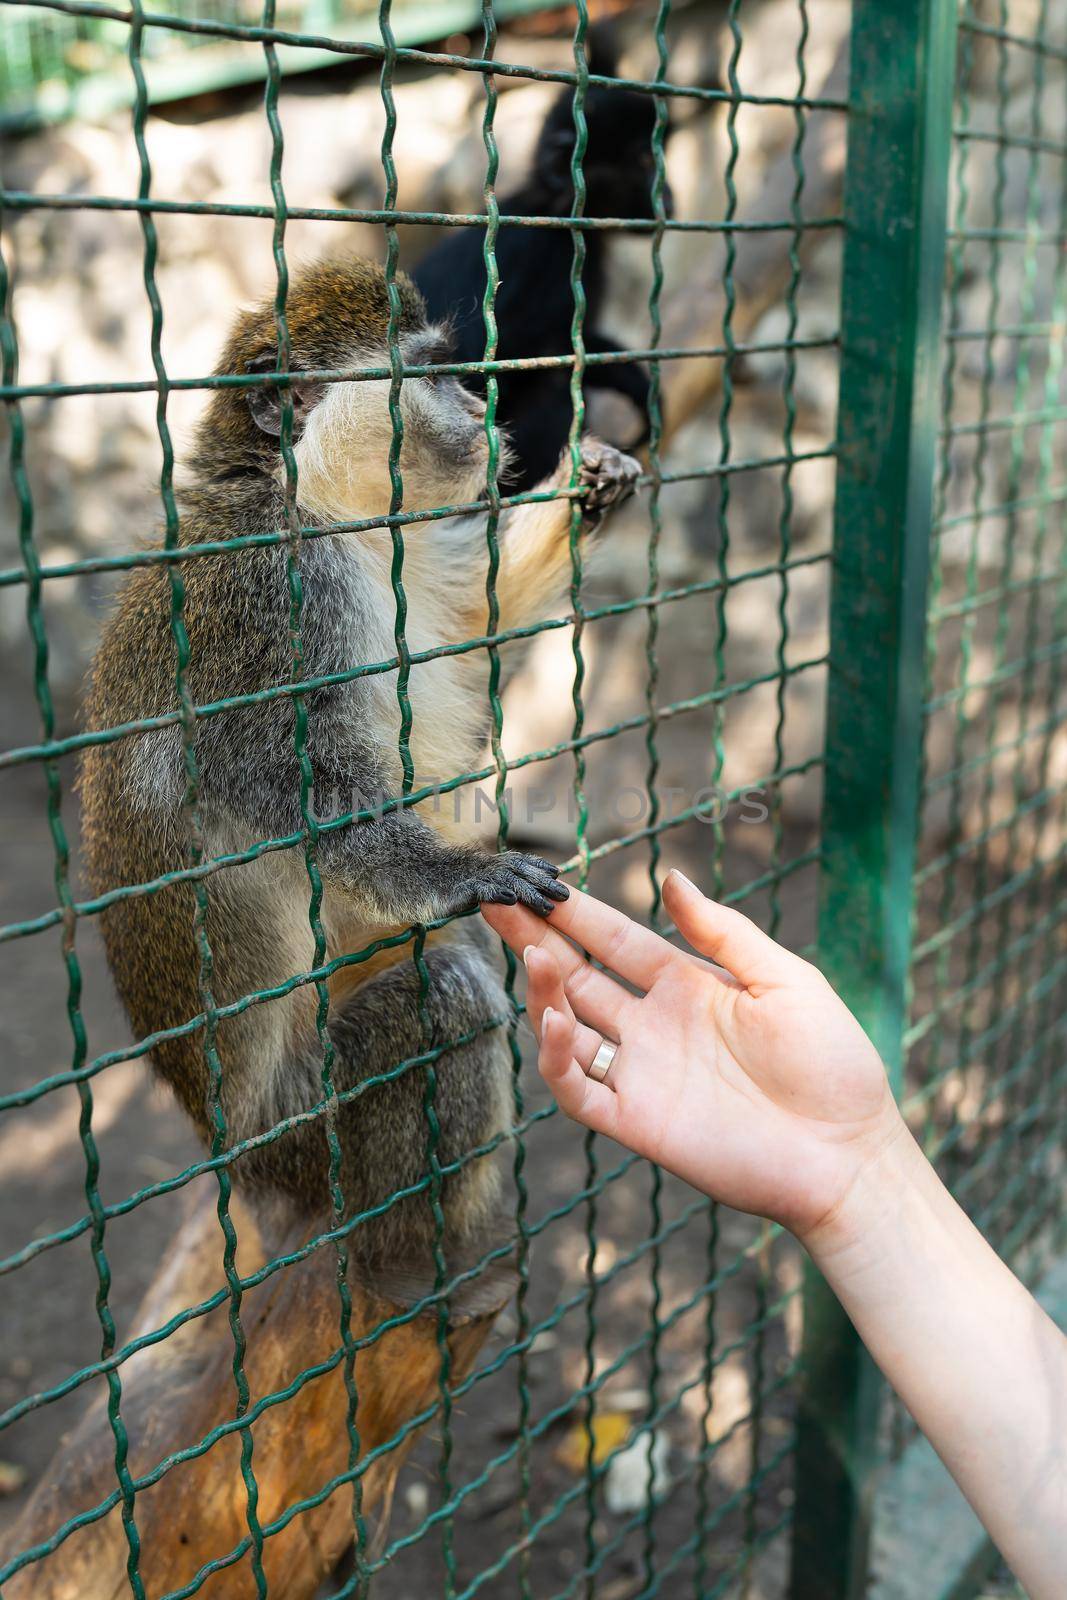 The animal needs human love and protection. The monkey holds the girl's hand in the petting zoo